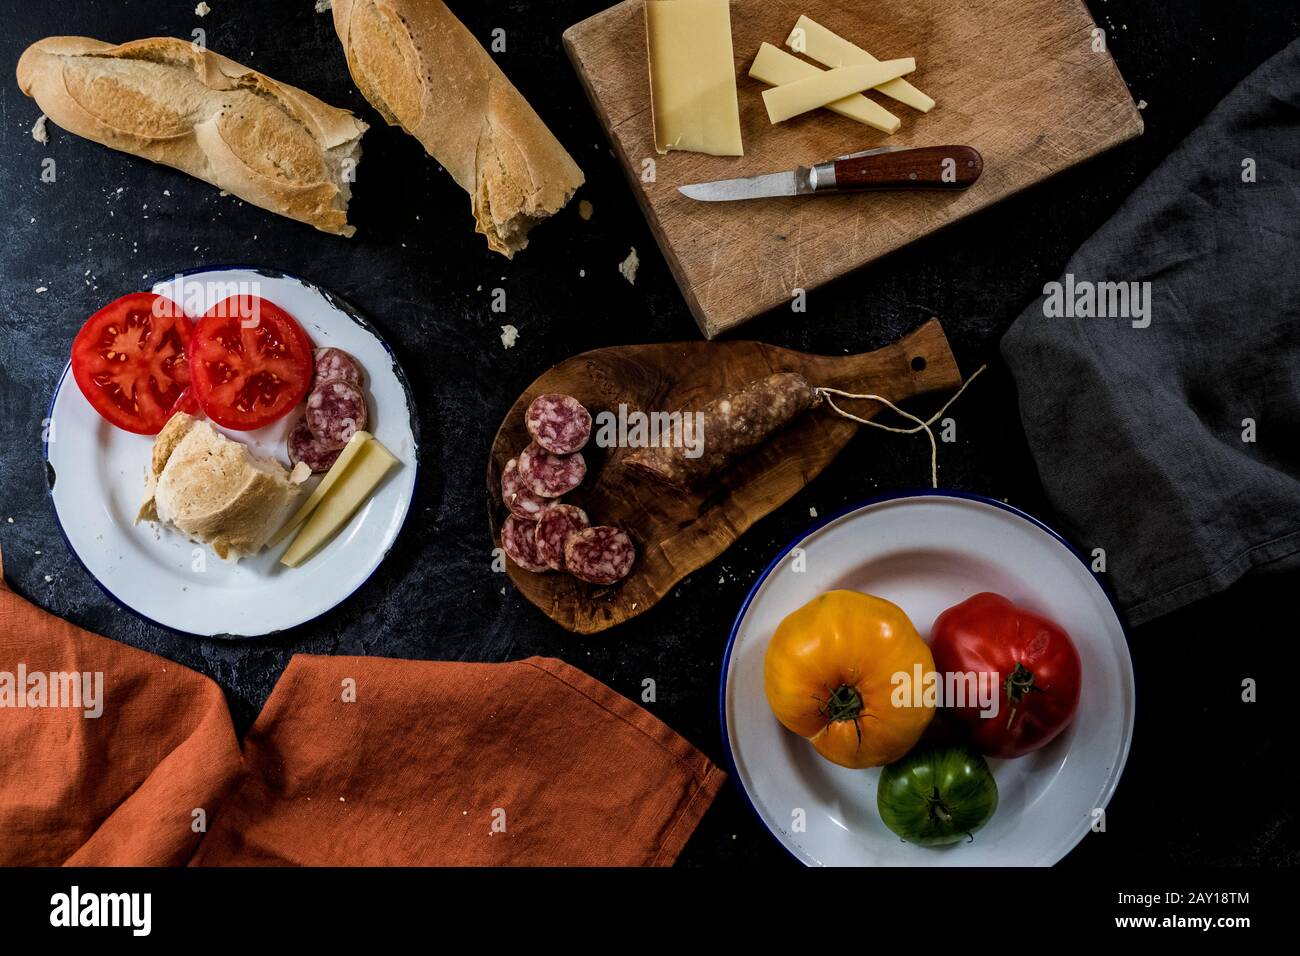 High angle close up of a selection of cheeses, tomatoes, salami and French baguette on white enamel plates on black background. Stock Photo